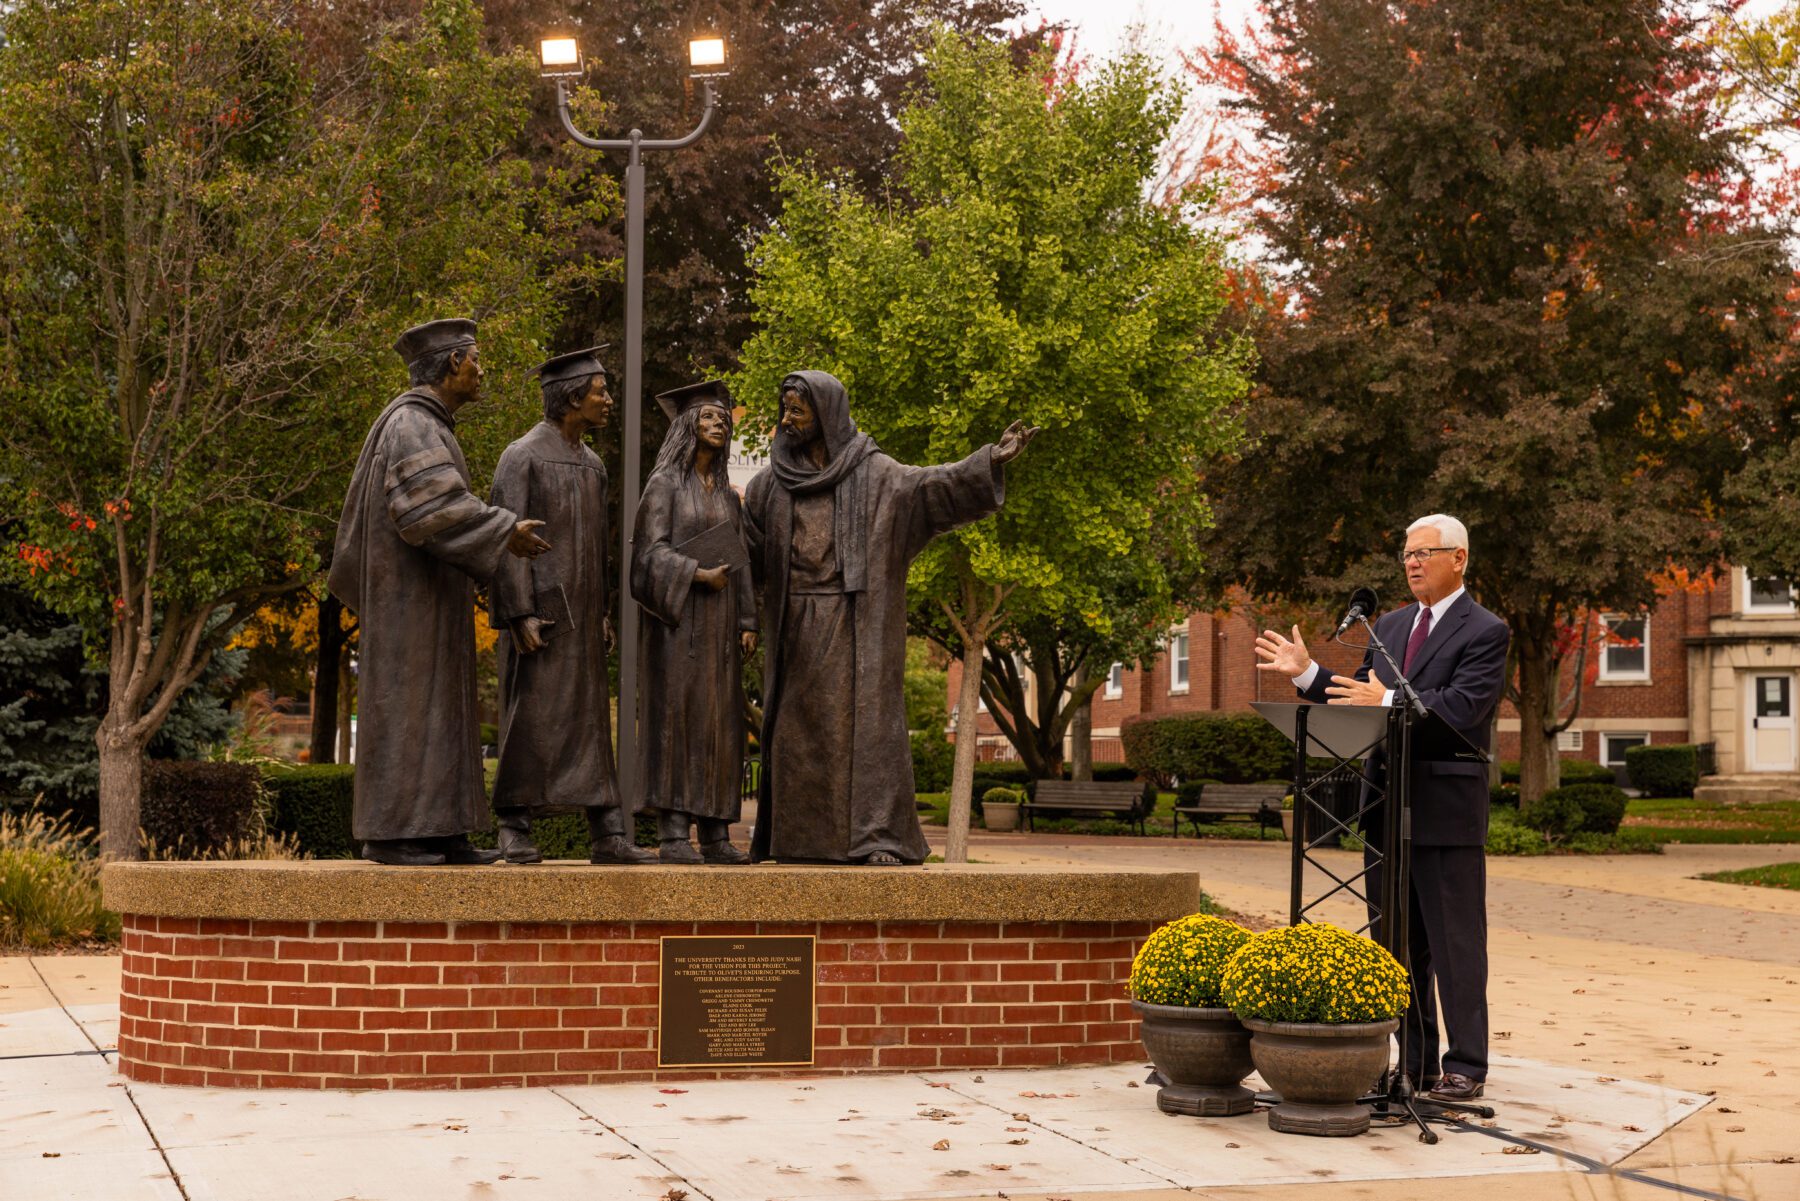 Ed Nash speaks to those who came for the unveiling of the new statue on campus.